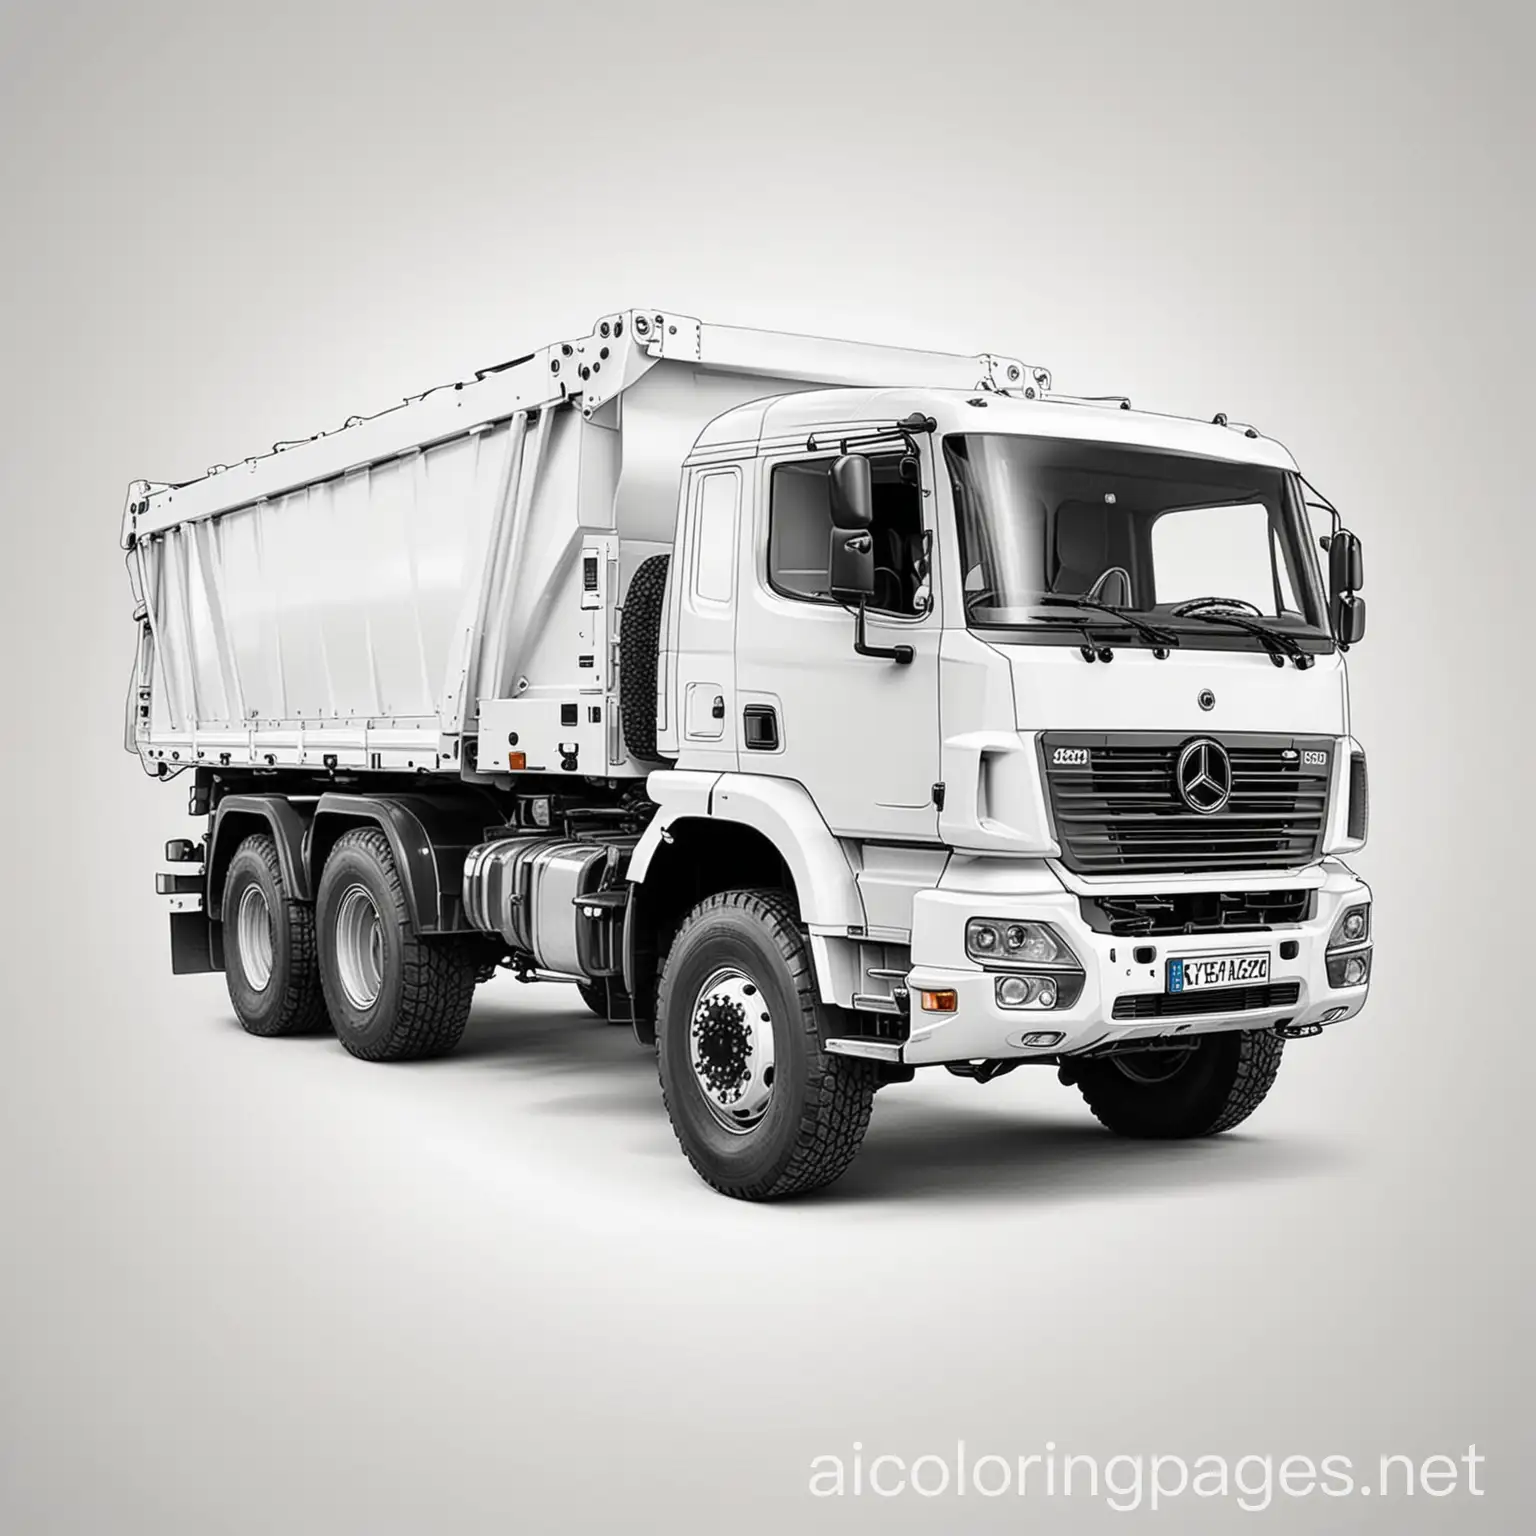 German thw truck, Coloring Page, black and white, line art, white background, Simplicity, Ample White Space. The background of the coloring page is plain white to make it easy for young children to color within the lines. The outlines of all the subjects are easy to distinguish, making it simple for kids to color without too much difficulty